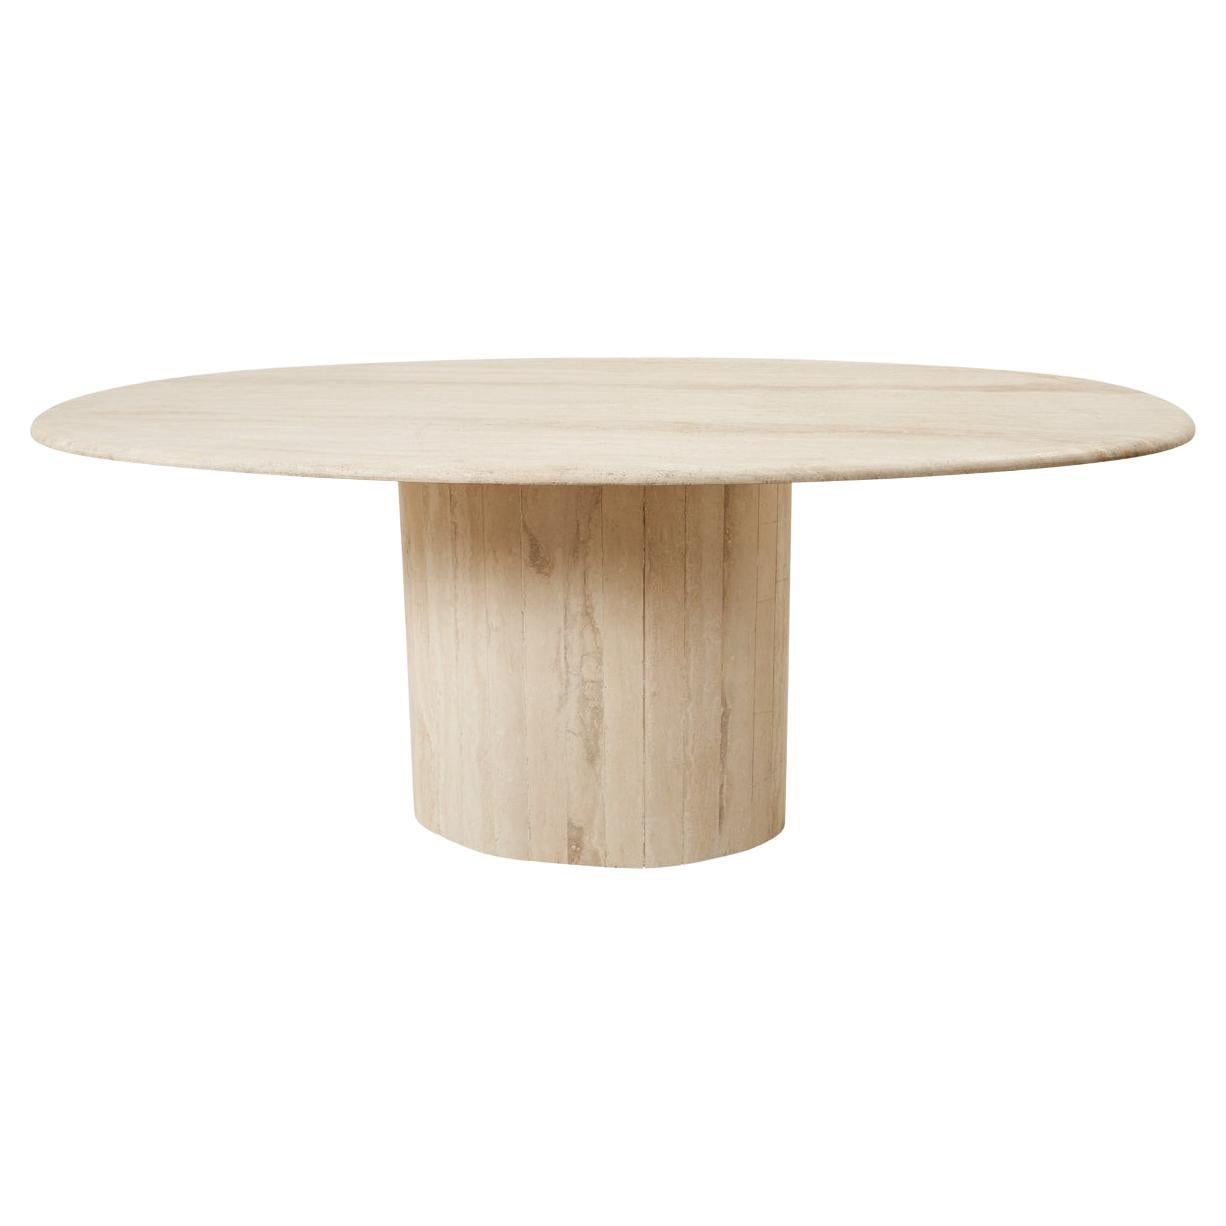 What is a travertine table?